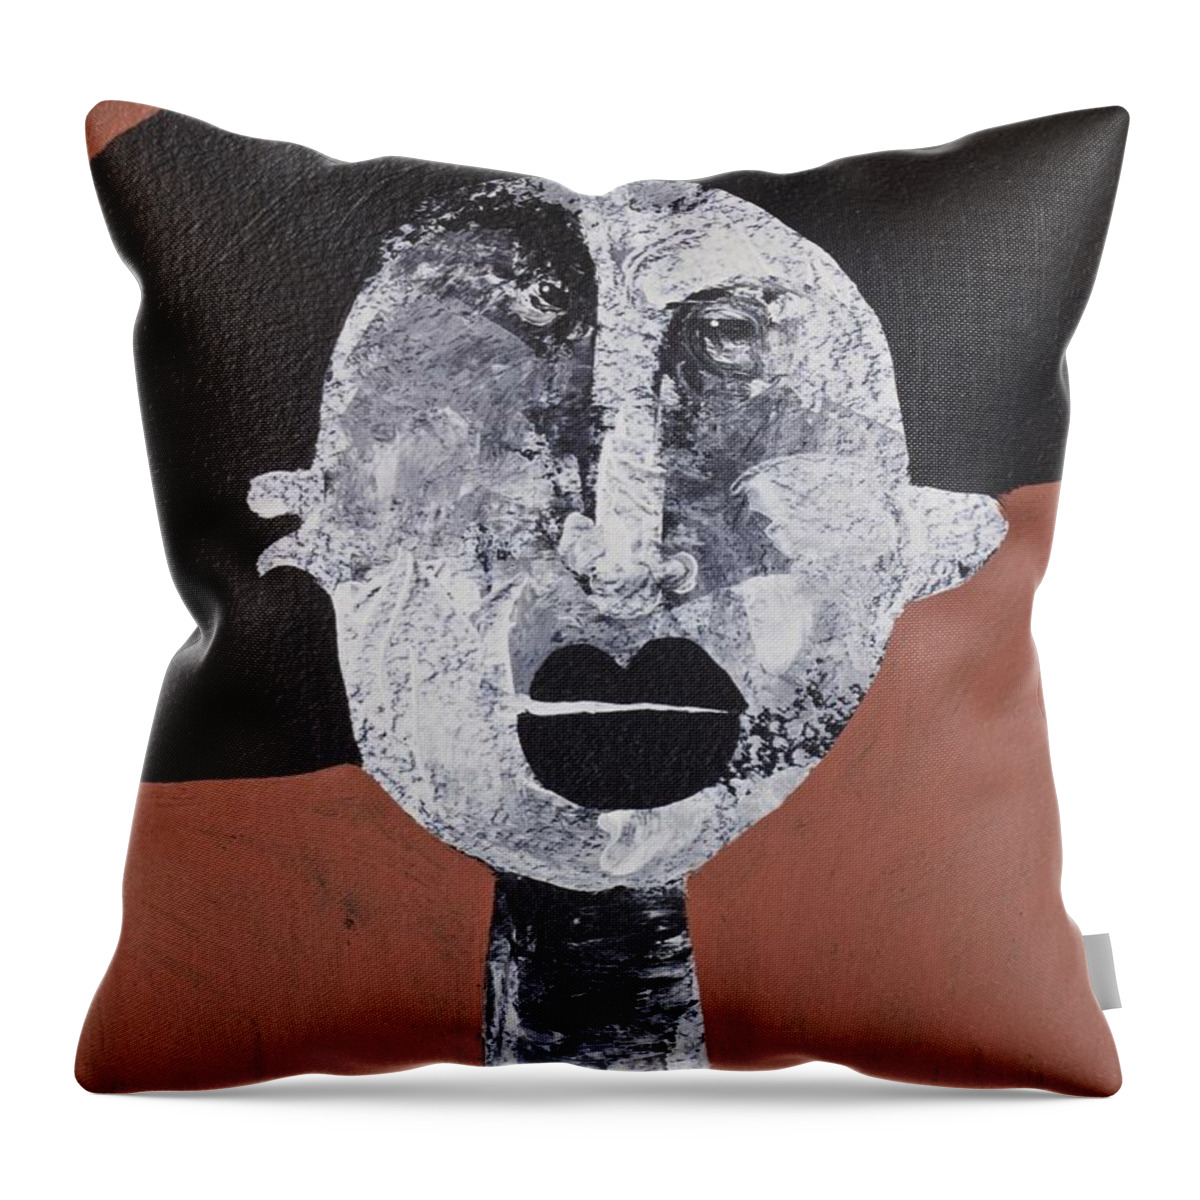 Figurative Throw Pillow featuring the painting Protesto No. 15 by Mark M Mellon